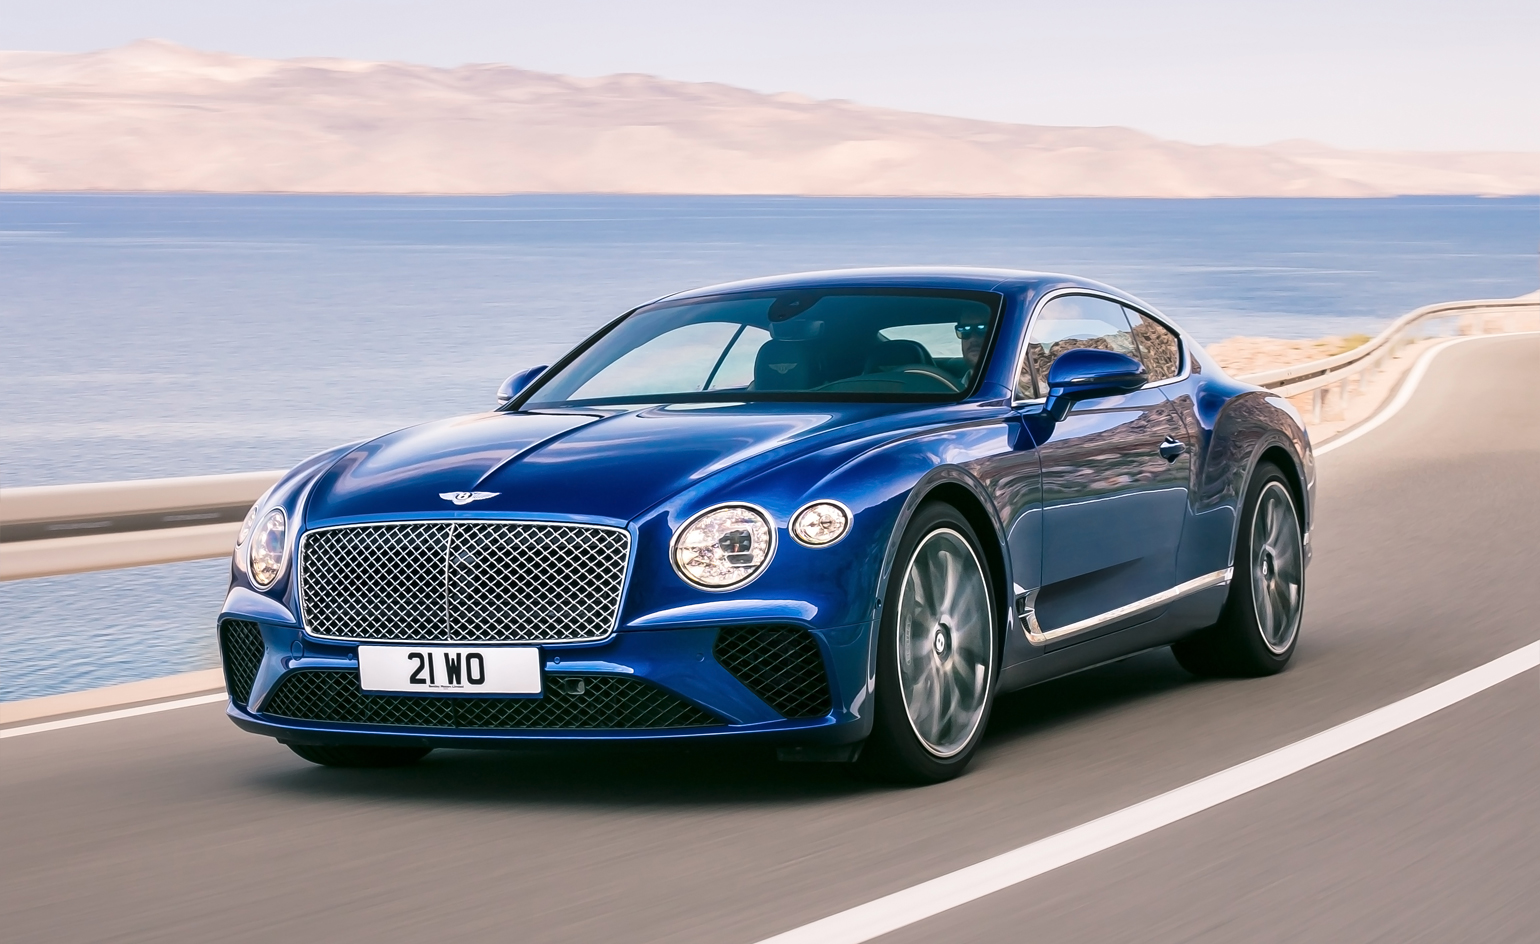 Bentley's new Continental GT is a